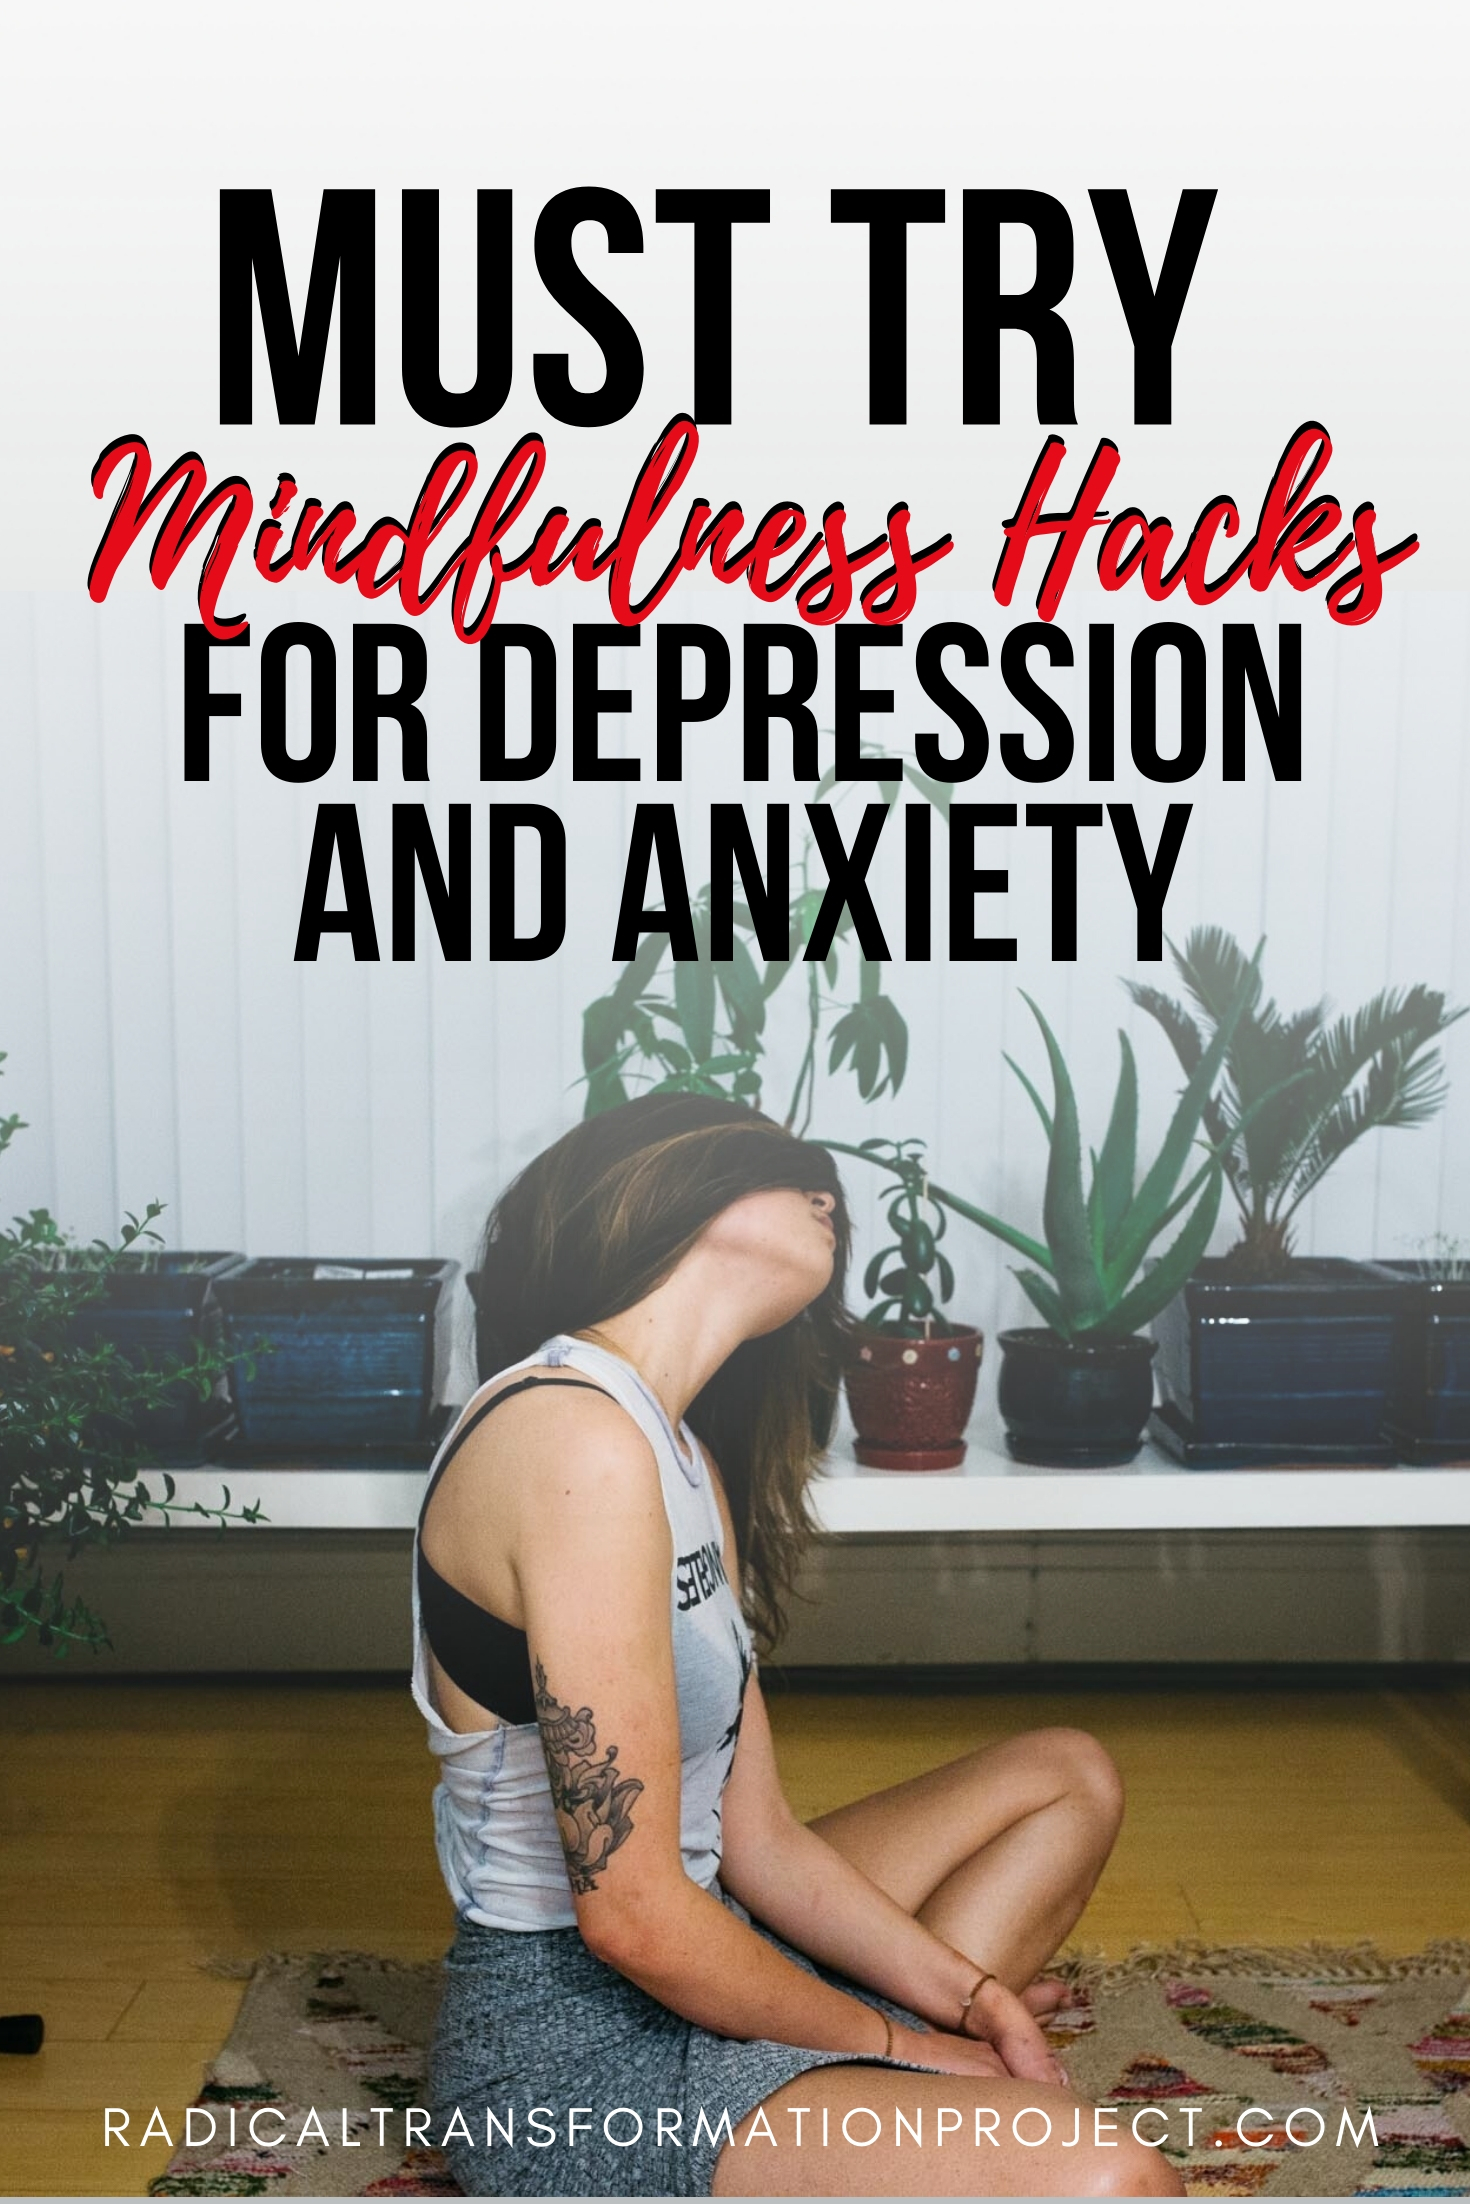 MUST TRY MINDFULLNESS HACKS FOR DEPRESSION AND ANXIETY